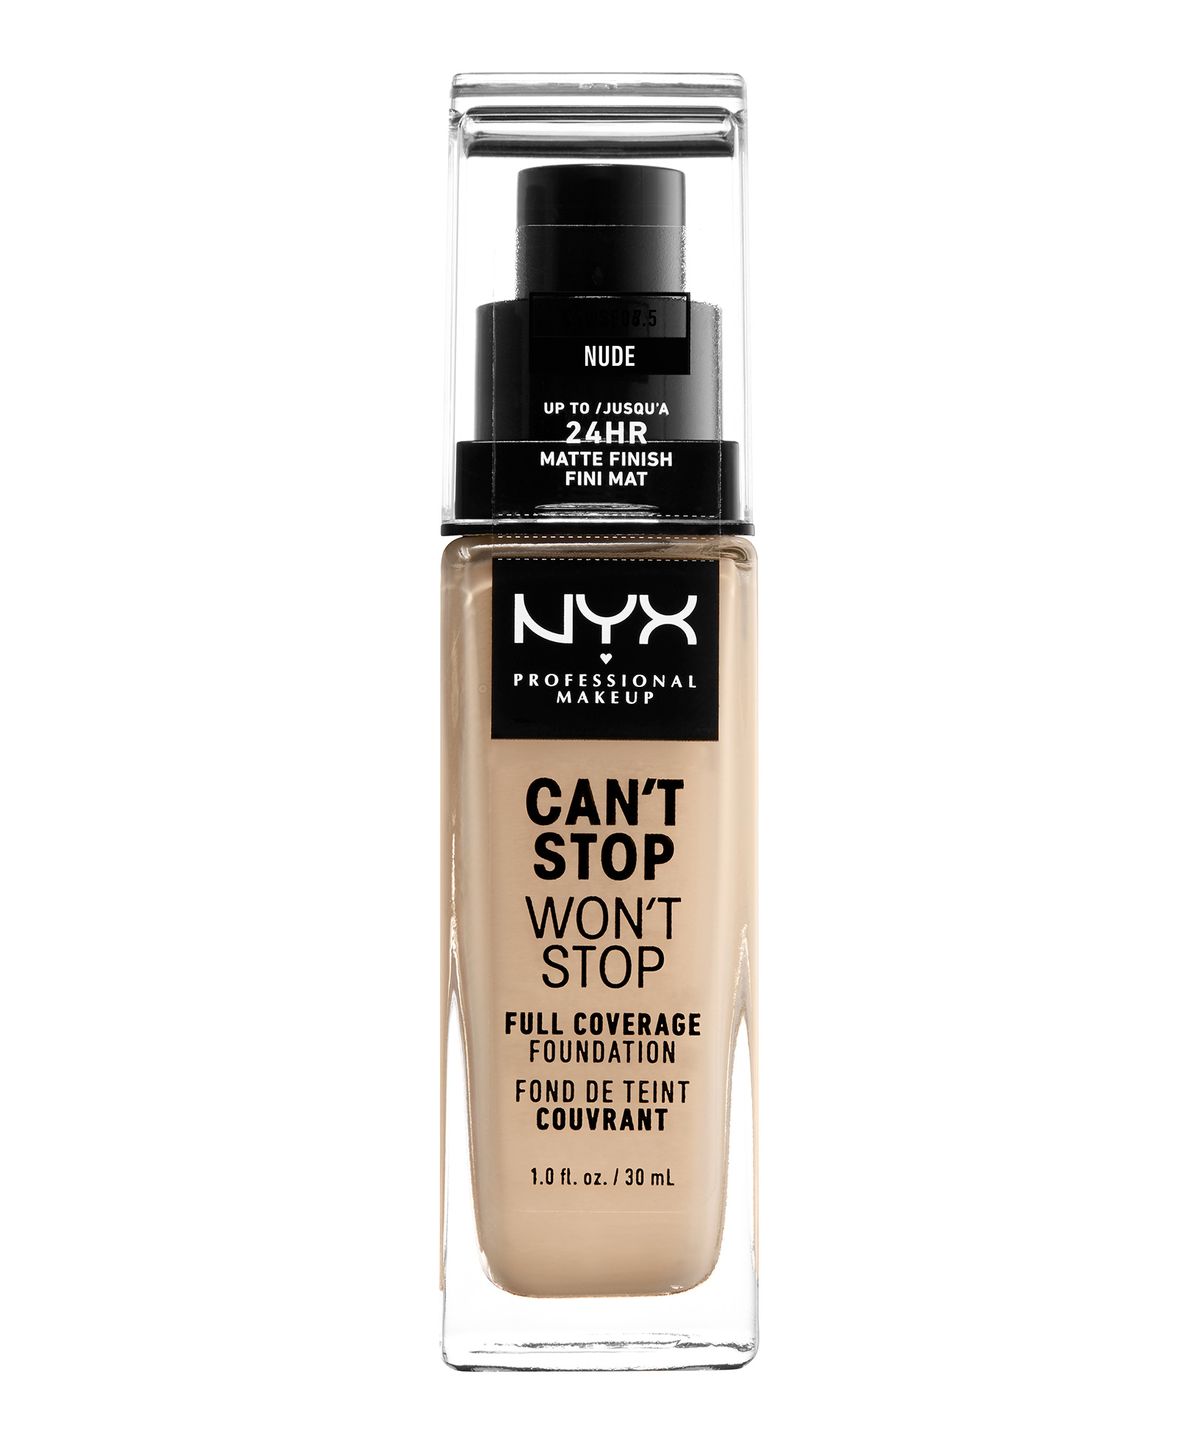 CANT STOP WONT STOP 24HR FOUNDATION NUDE - NYX PROFESSIONAL MAKEUP